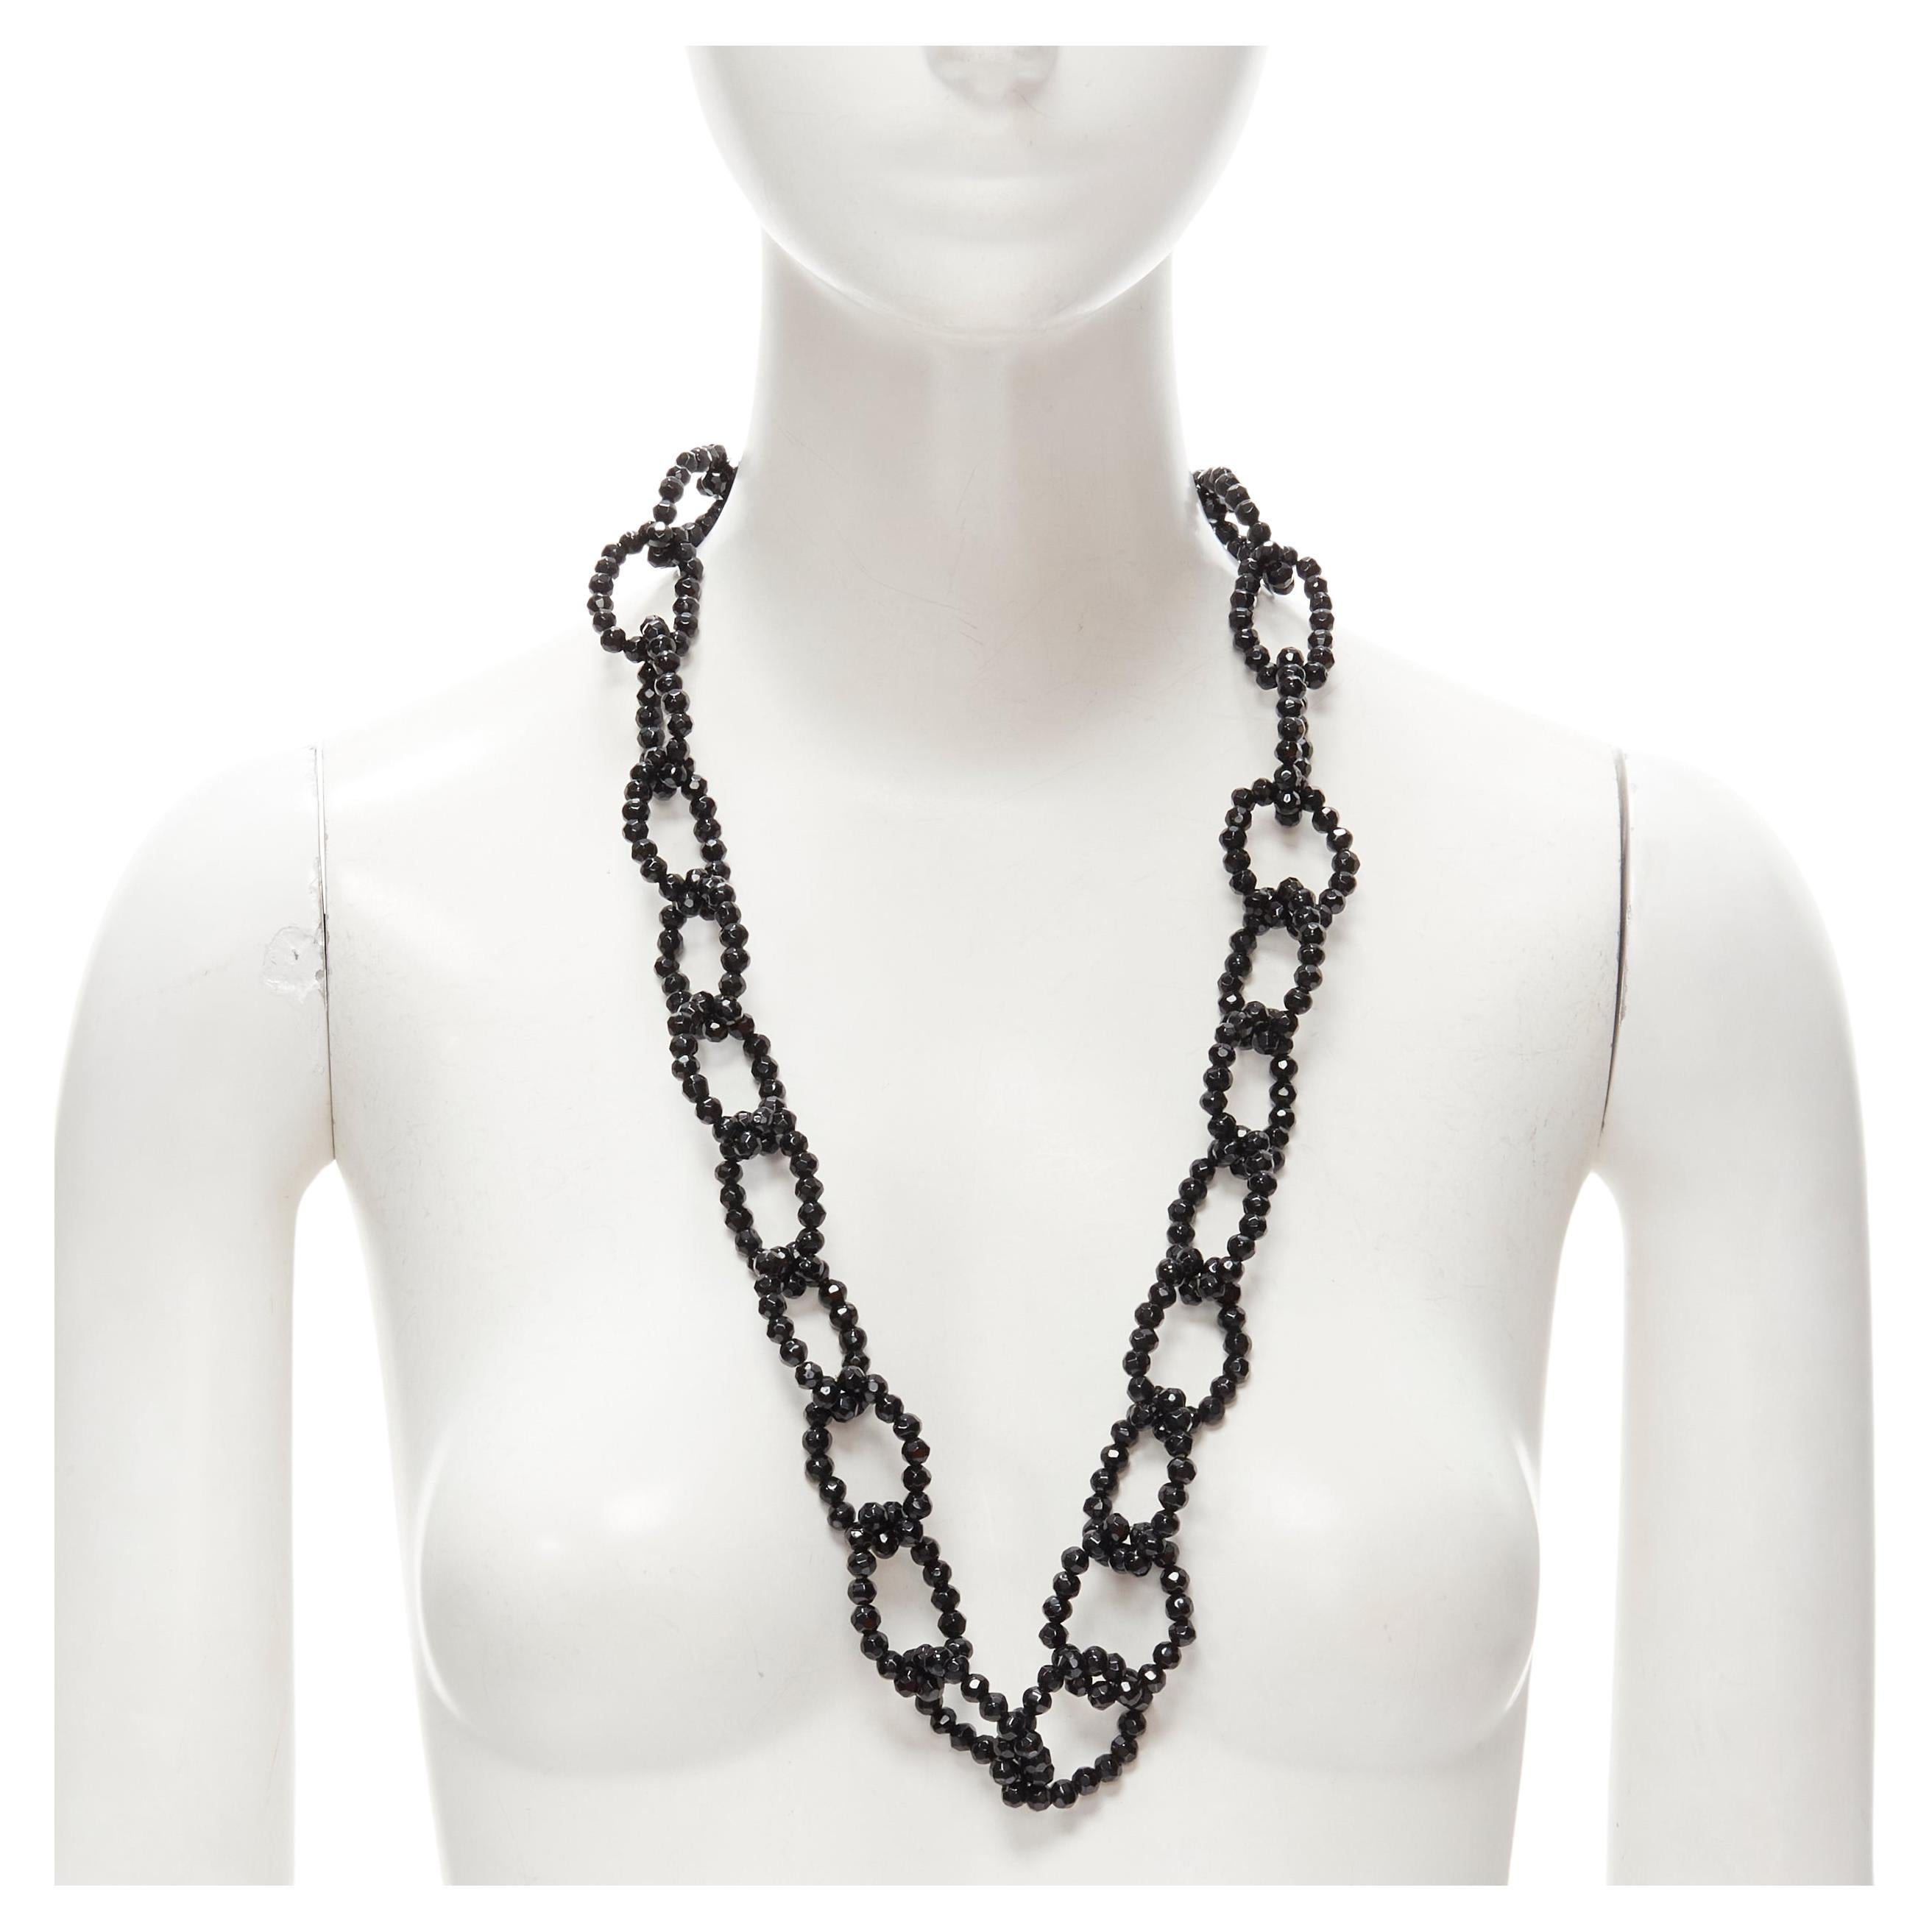 LEE ANGEL black beads loop chain long oversized statement necklace For Sale